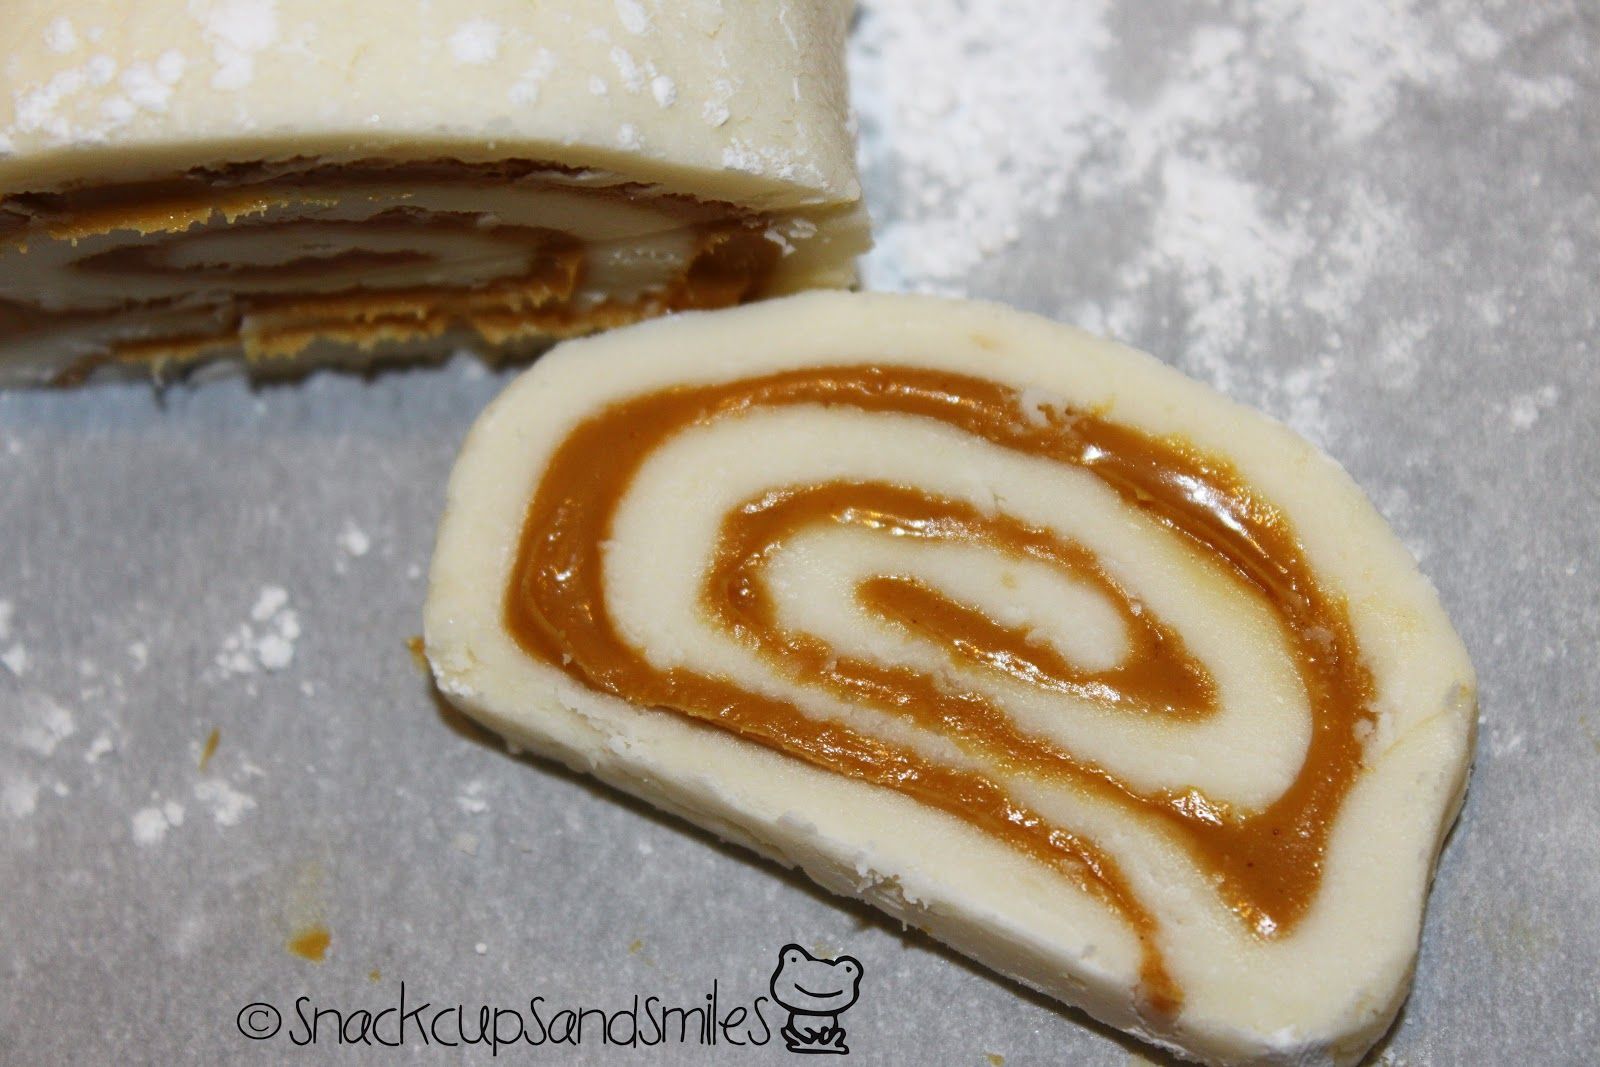 Peanut butter roll – always had this homemade at Christmas